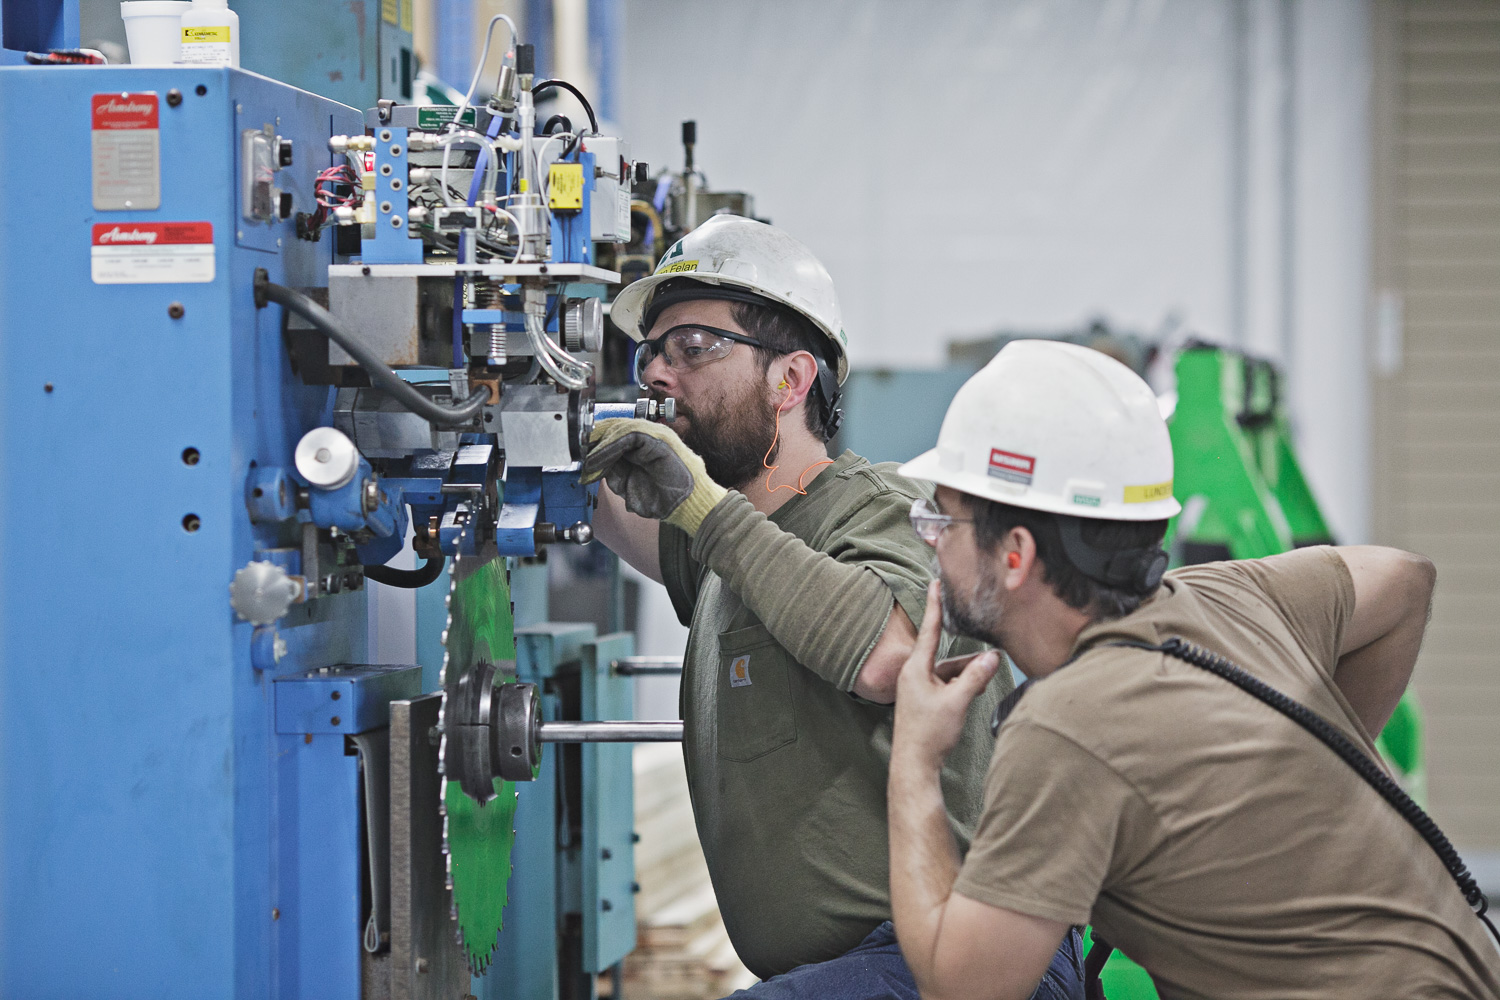 Two individuals wearing hardhats are performing maintenance on machinery.